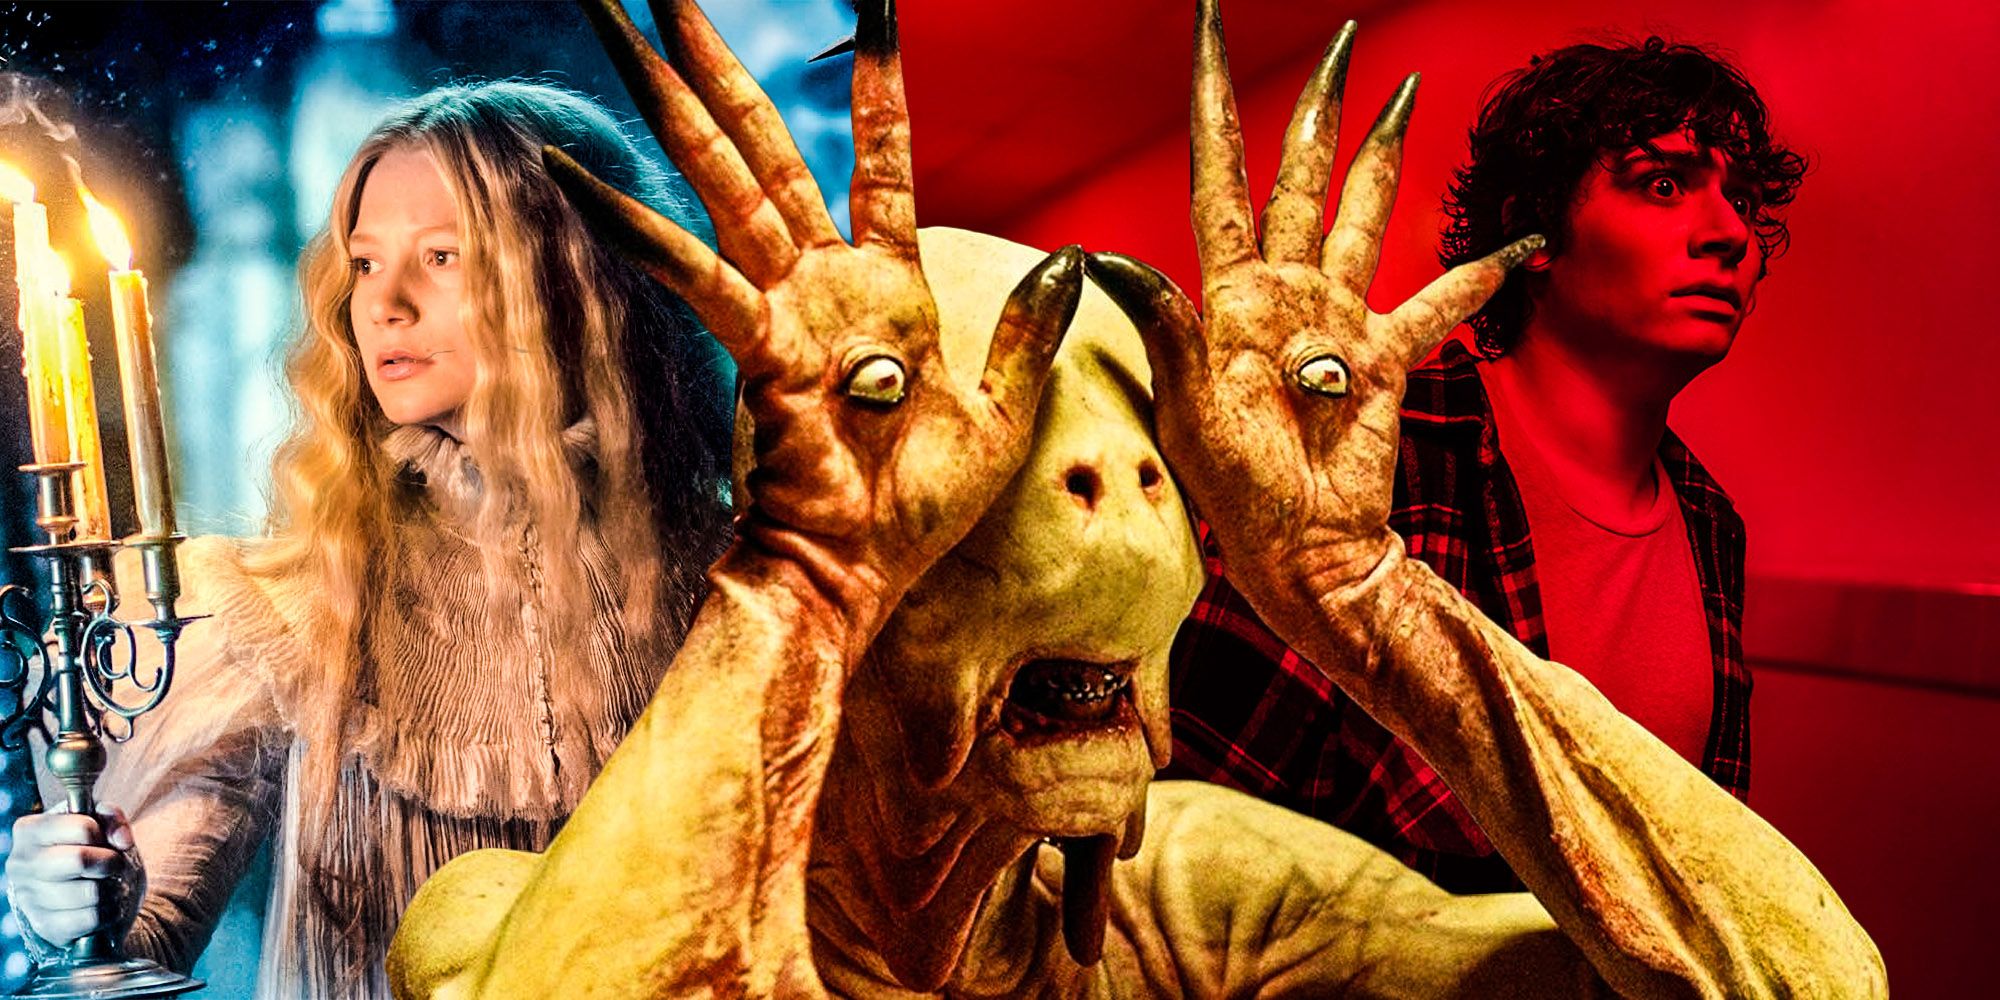 Guillermo del toro Horror movies ranked best to worst Crimson peak Pans Labyrinth Scary stories to tell in the dark